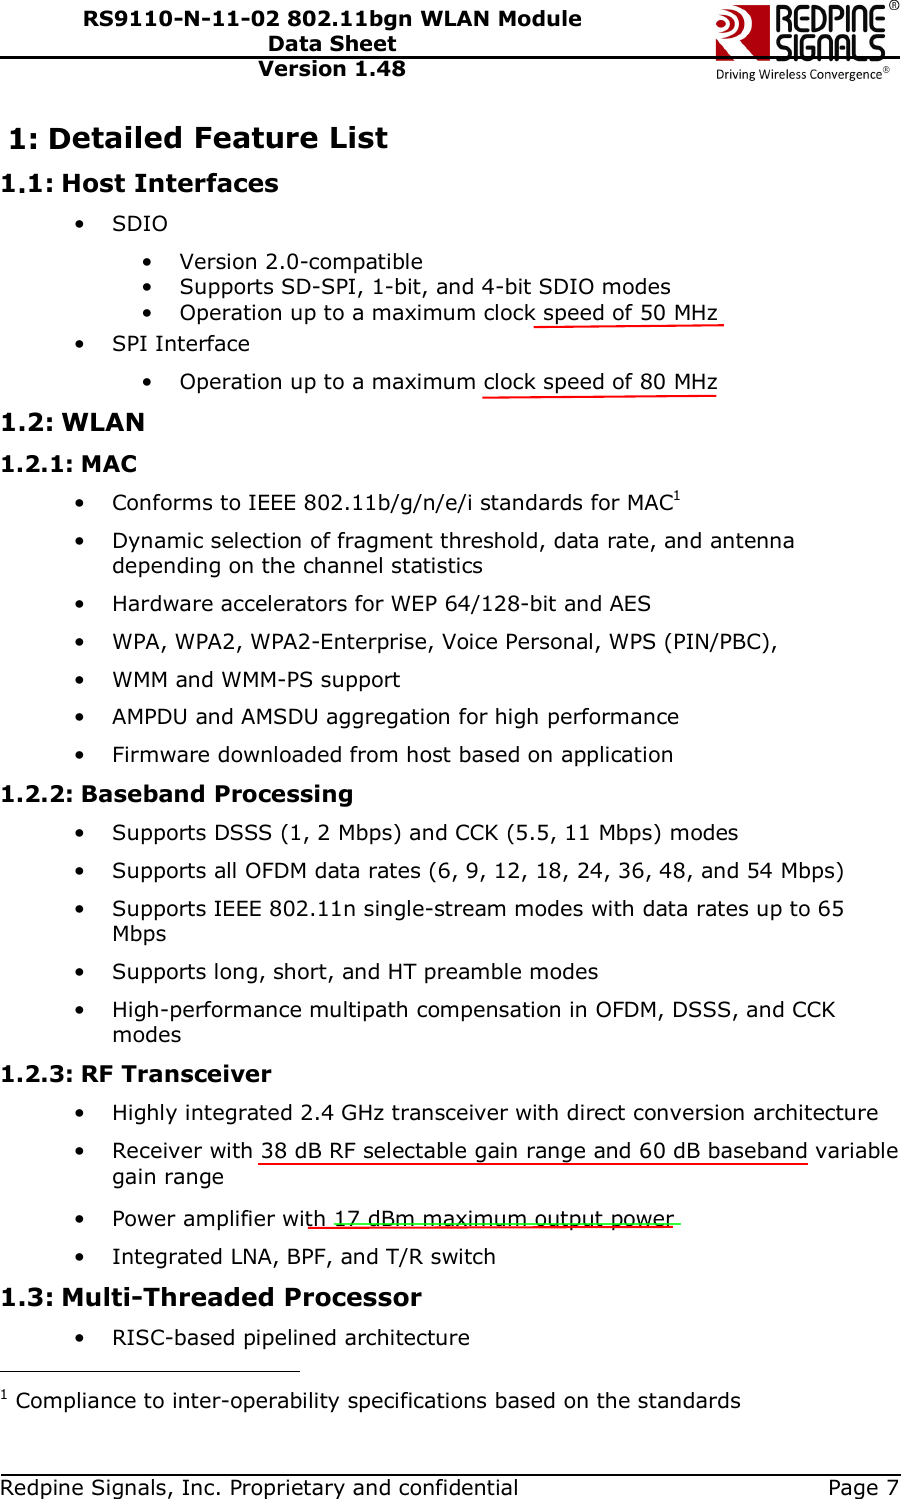   Redpine Signals, Inc. Proprietary and confidential  Page 7 RS9110-N-11-02 802.11bgn WLAN Module Data Sheet Version 1.48 1: Detailed Feature List 1.1: Host Interfaces • SDIO • Version 2.0-compatible • Supports SD-SPI, 1-bit, and 4-bit SDIO modes • Operation up to a maximum clock speed of 50 MHz • SPI Interface • Operation up to a maximum clock speed of 80 MHz 1.2: WLAN 1.2.1: MAC • Conforms to IEEE 802.11b/g/n/e/i standards for MAC1 • Dynamic selection of fragment threshold, data rate, and antenna depending on the channel statistics • Hardware accelerators for WEP 64/128-bit and AES • WPA, WPA2, WPA2-Enterprise, Voice Personal, WPS (PIN/PBC), • WMM and WMM-PS support • AMPDU and AMSDU aggregation for high performance • Firmware downloaded from host based on application 1.2.2: Baseband Processing • Supports DSSS (1, 2 Mbps) and CCK (5.5, 11 Mbps) modes • Supports all OFDM data rates (6, 9, 12, 18, 24, 36, 48, and 54 Mbps) • Supports IEEE 802.11n single-stream modes with data rates up to 65 Mbps • Supports long, short, and HT preamble modes • High-performance multipath compensation in OFDM, DSSS, and CCK modes 1.2.3: RF Transceiver • Highly integrated 2.4 GHz transceiver with direct conversion architecture • Receiver with 38 dB RF selectable gain range and 60 dB baseband variable gain range • Power amplifier with 17 dBm maximum output power • Integrated LNA, BPF, and T/R switch 1.3: Multi-Threaded Processor • RISC-based pipelined architecture                                           1 Compliance to inter-operability specifications based on the standards 